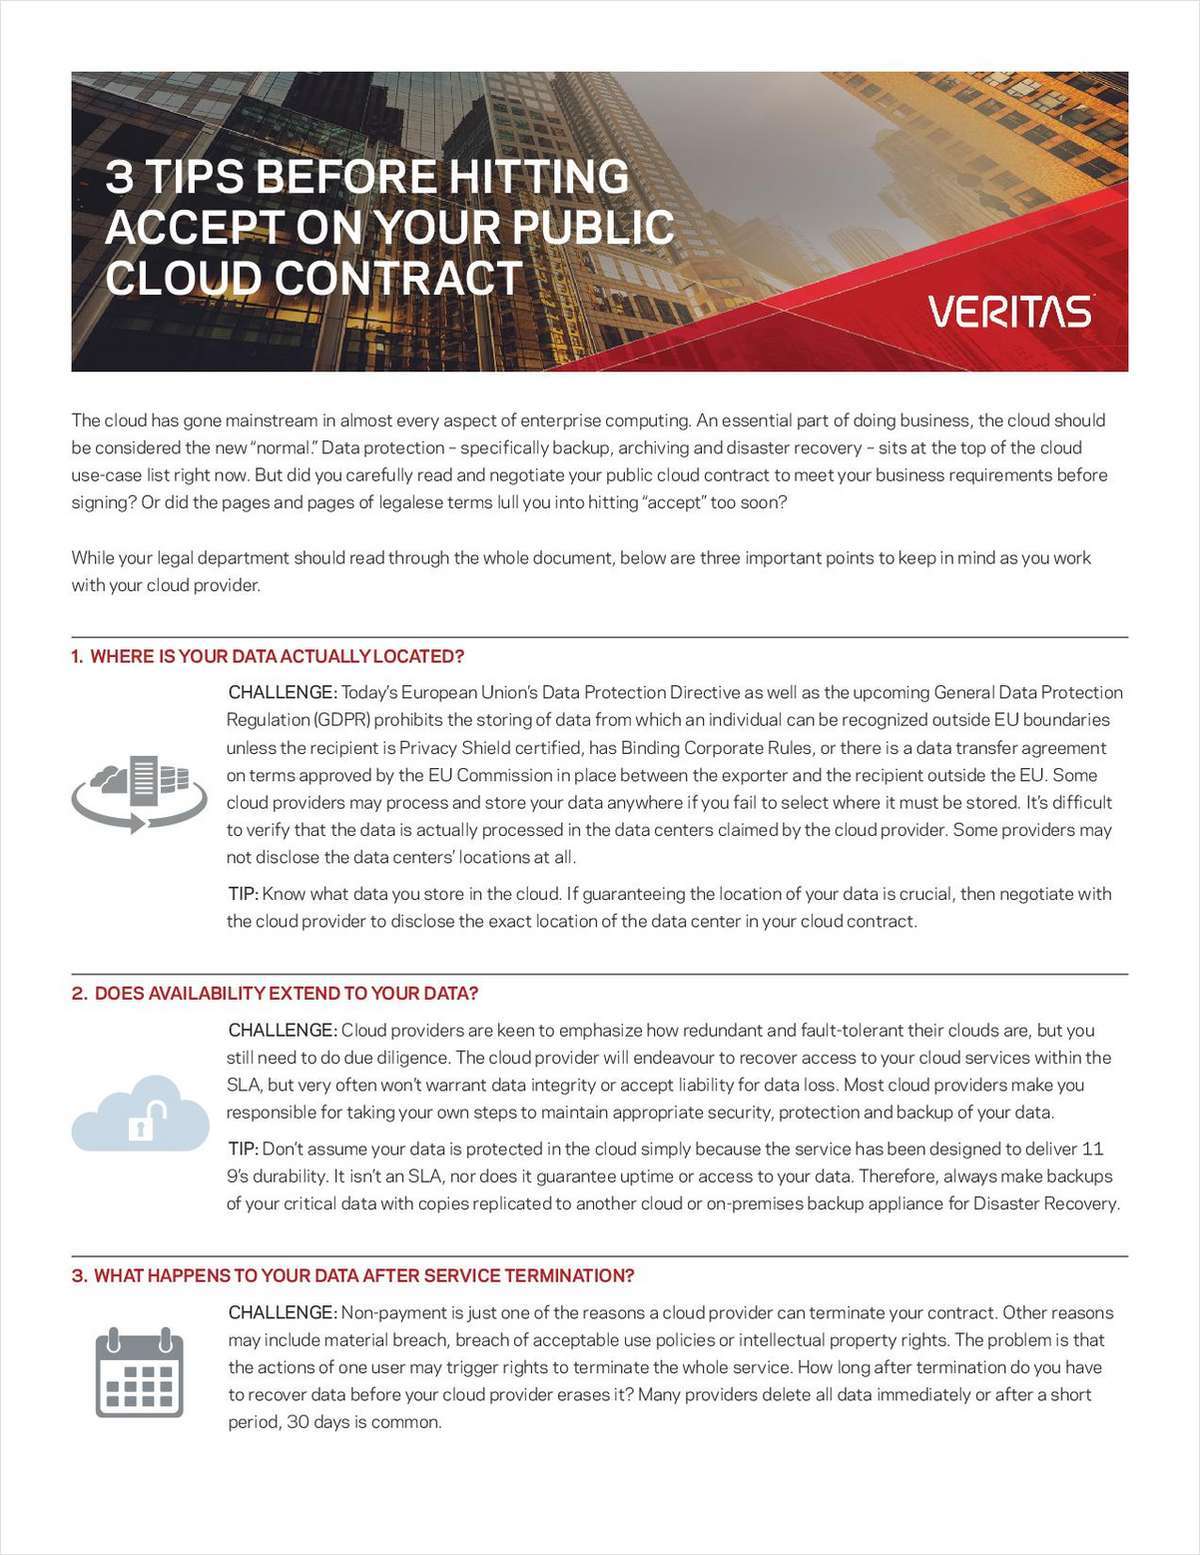 3 Tips Before Hitting Accept on Your Public Cloud Contract